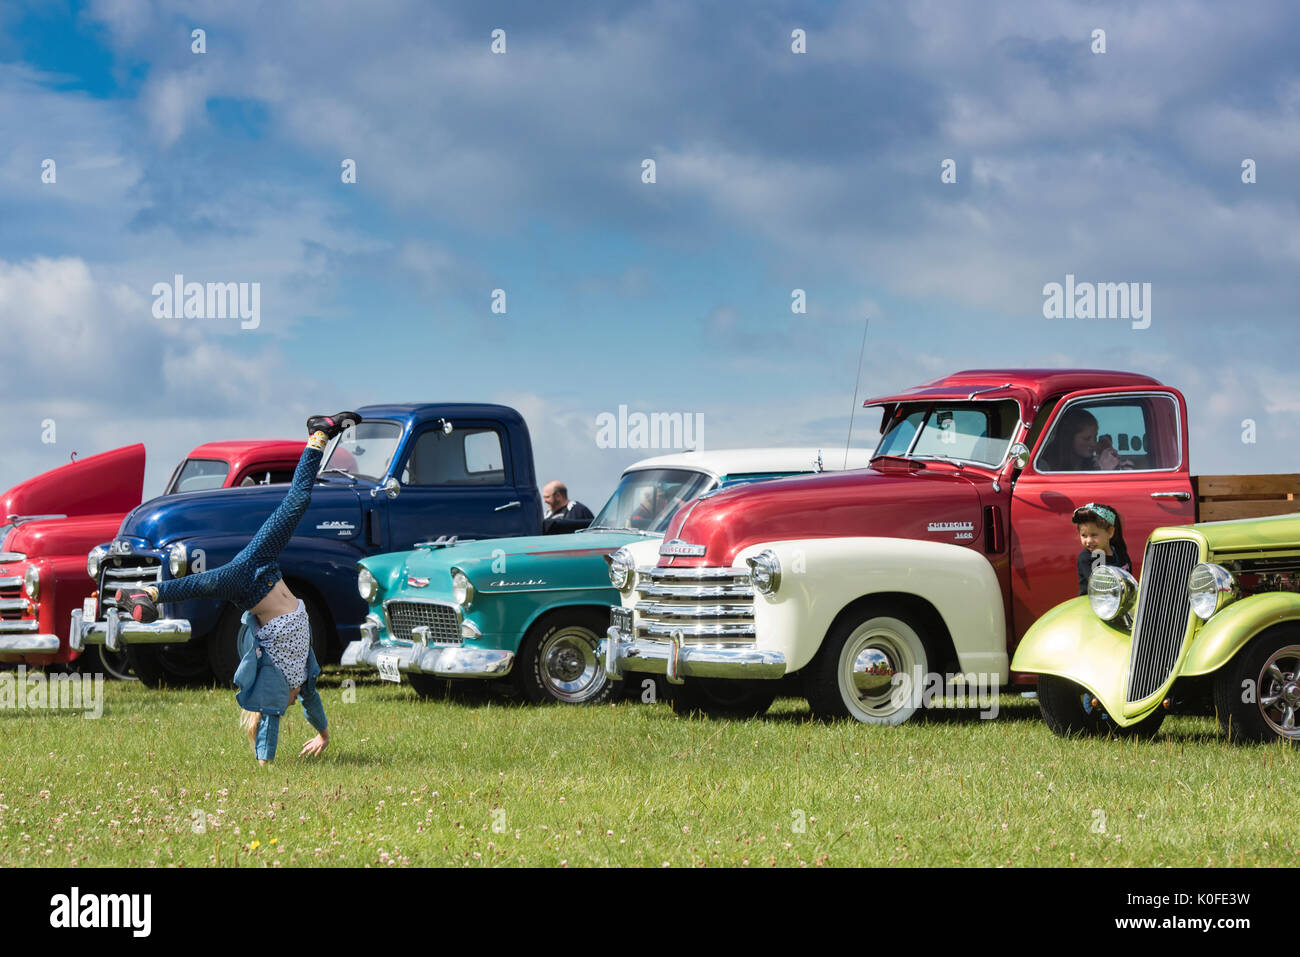 Young girl doing a handstand / cartwheel in front of 1950s Chevrolet pick up trucks at an american car show. Essex. UK Stock Photo